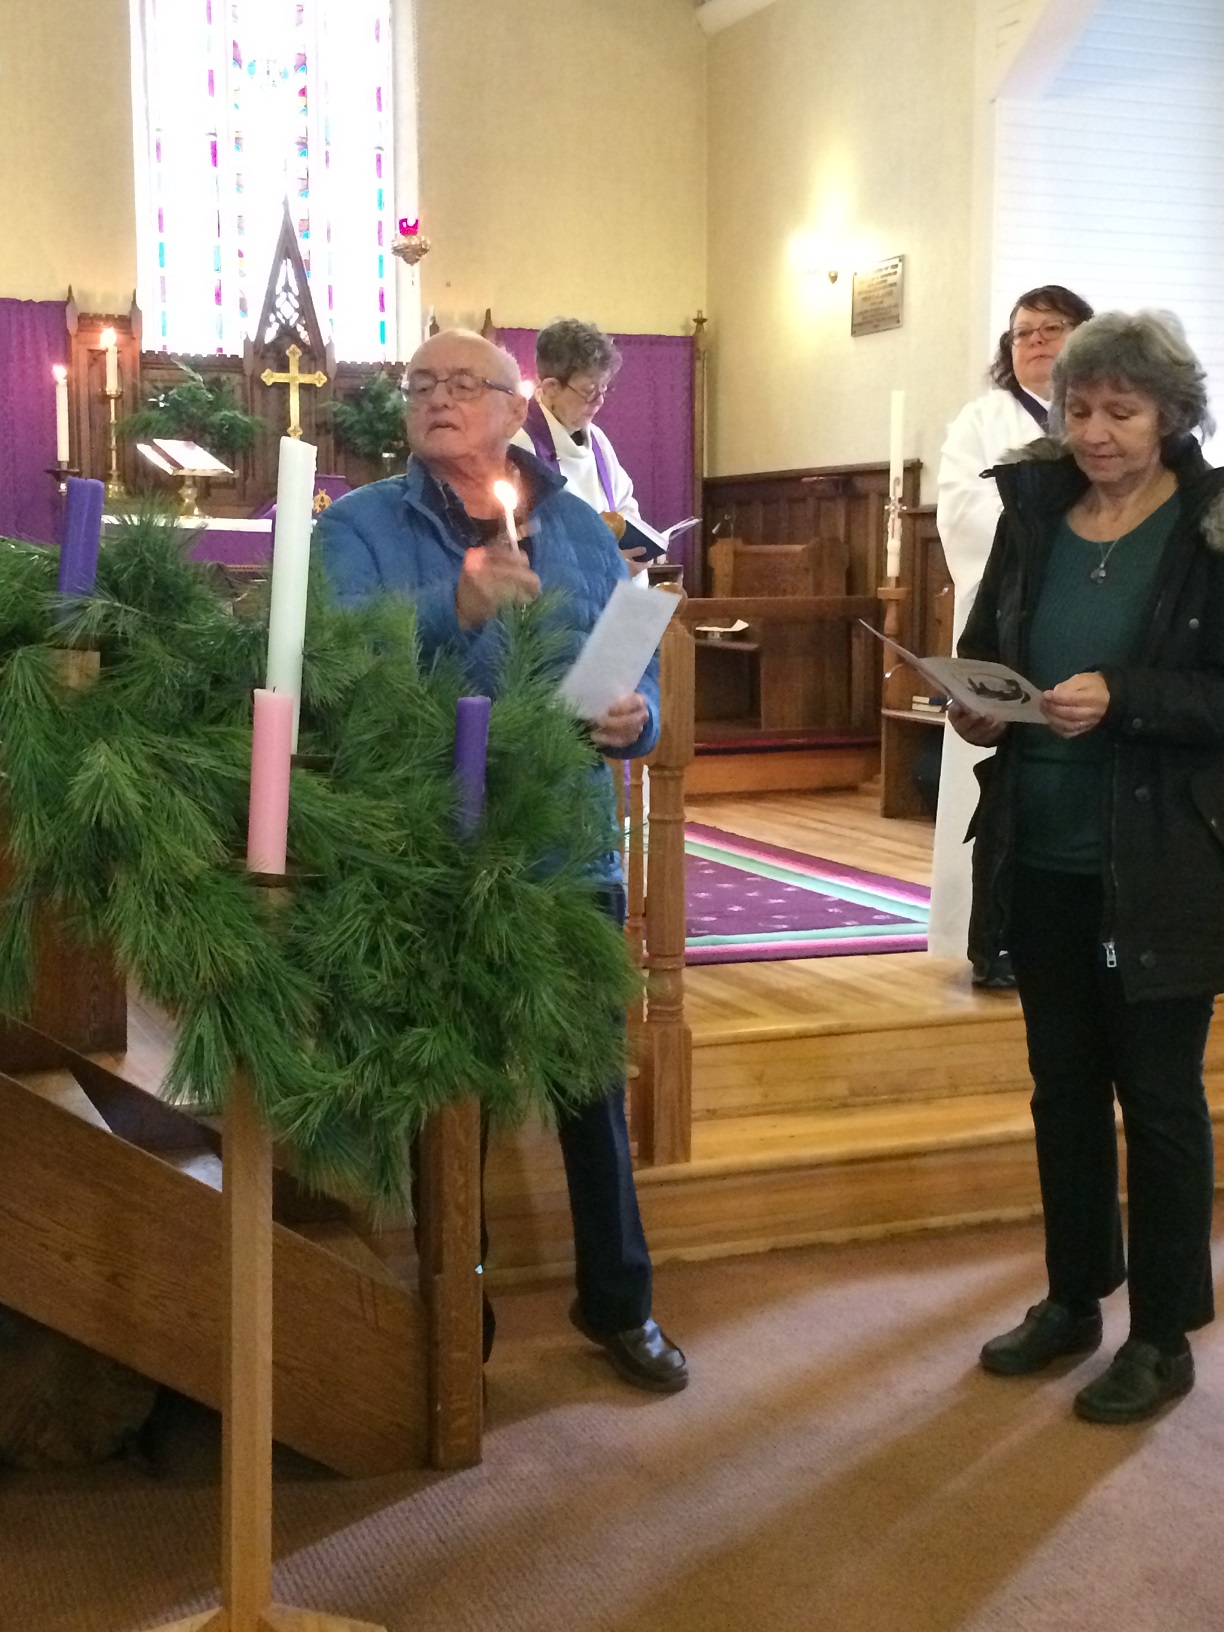 First Sunday of Advent - Candle was lit by Wardens Susan and Wayne